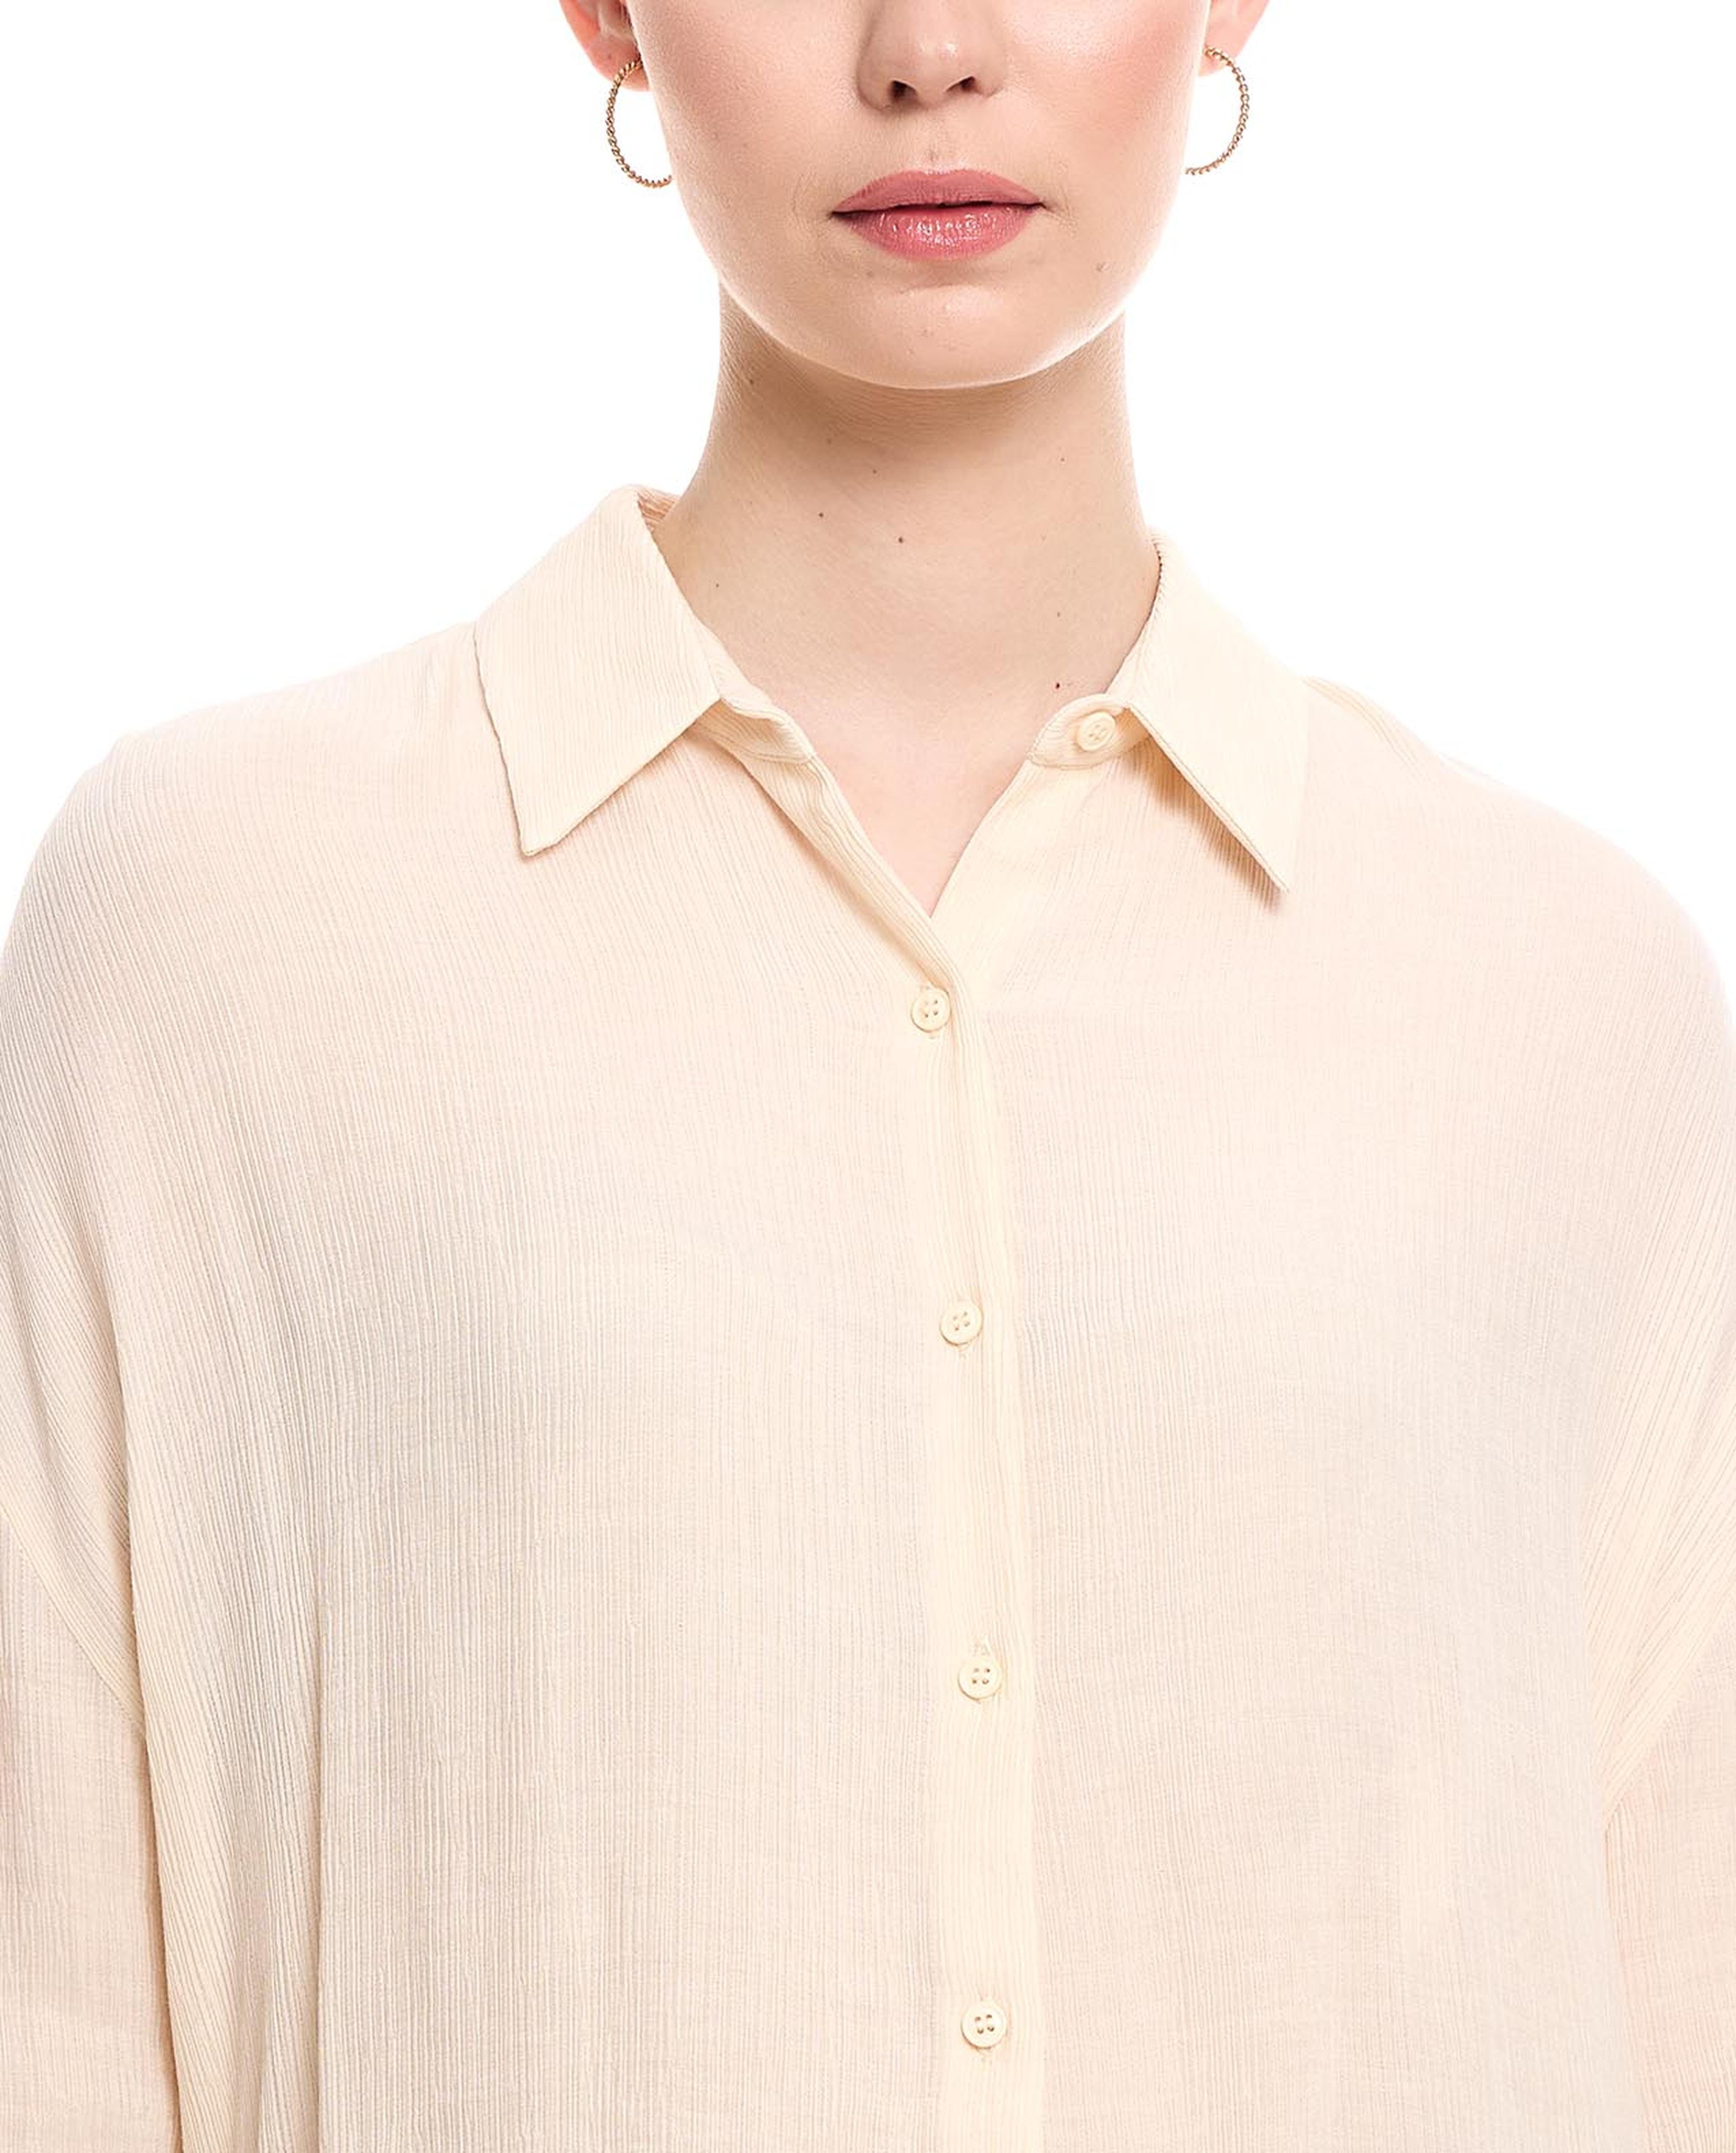 Textured Tunic Shirt with Classic Collar and Long Sleeves